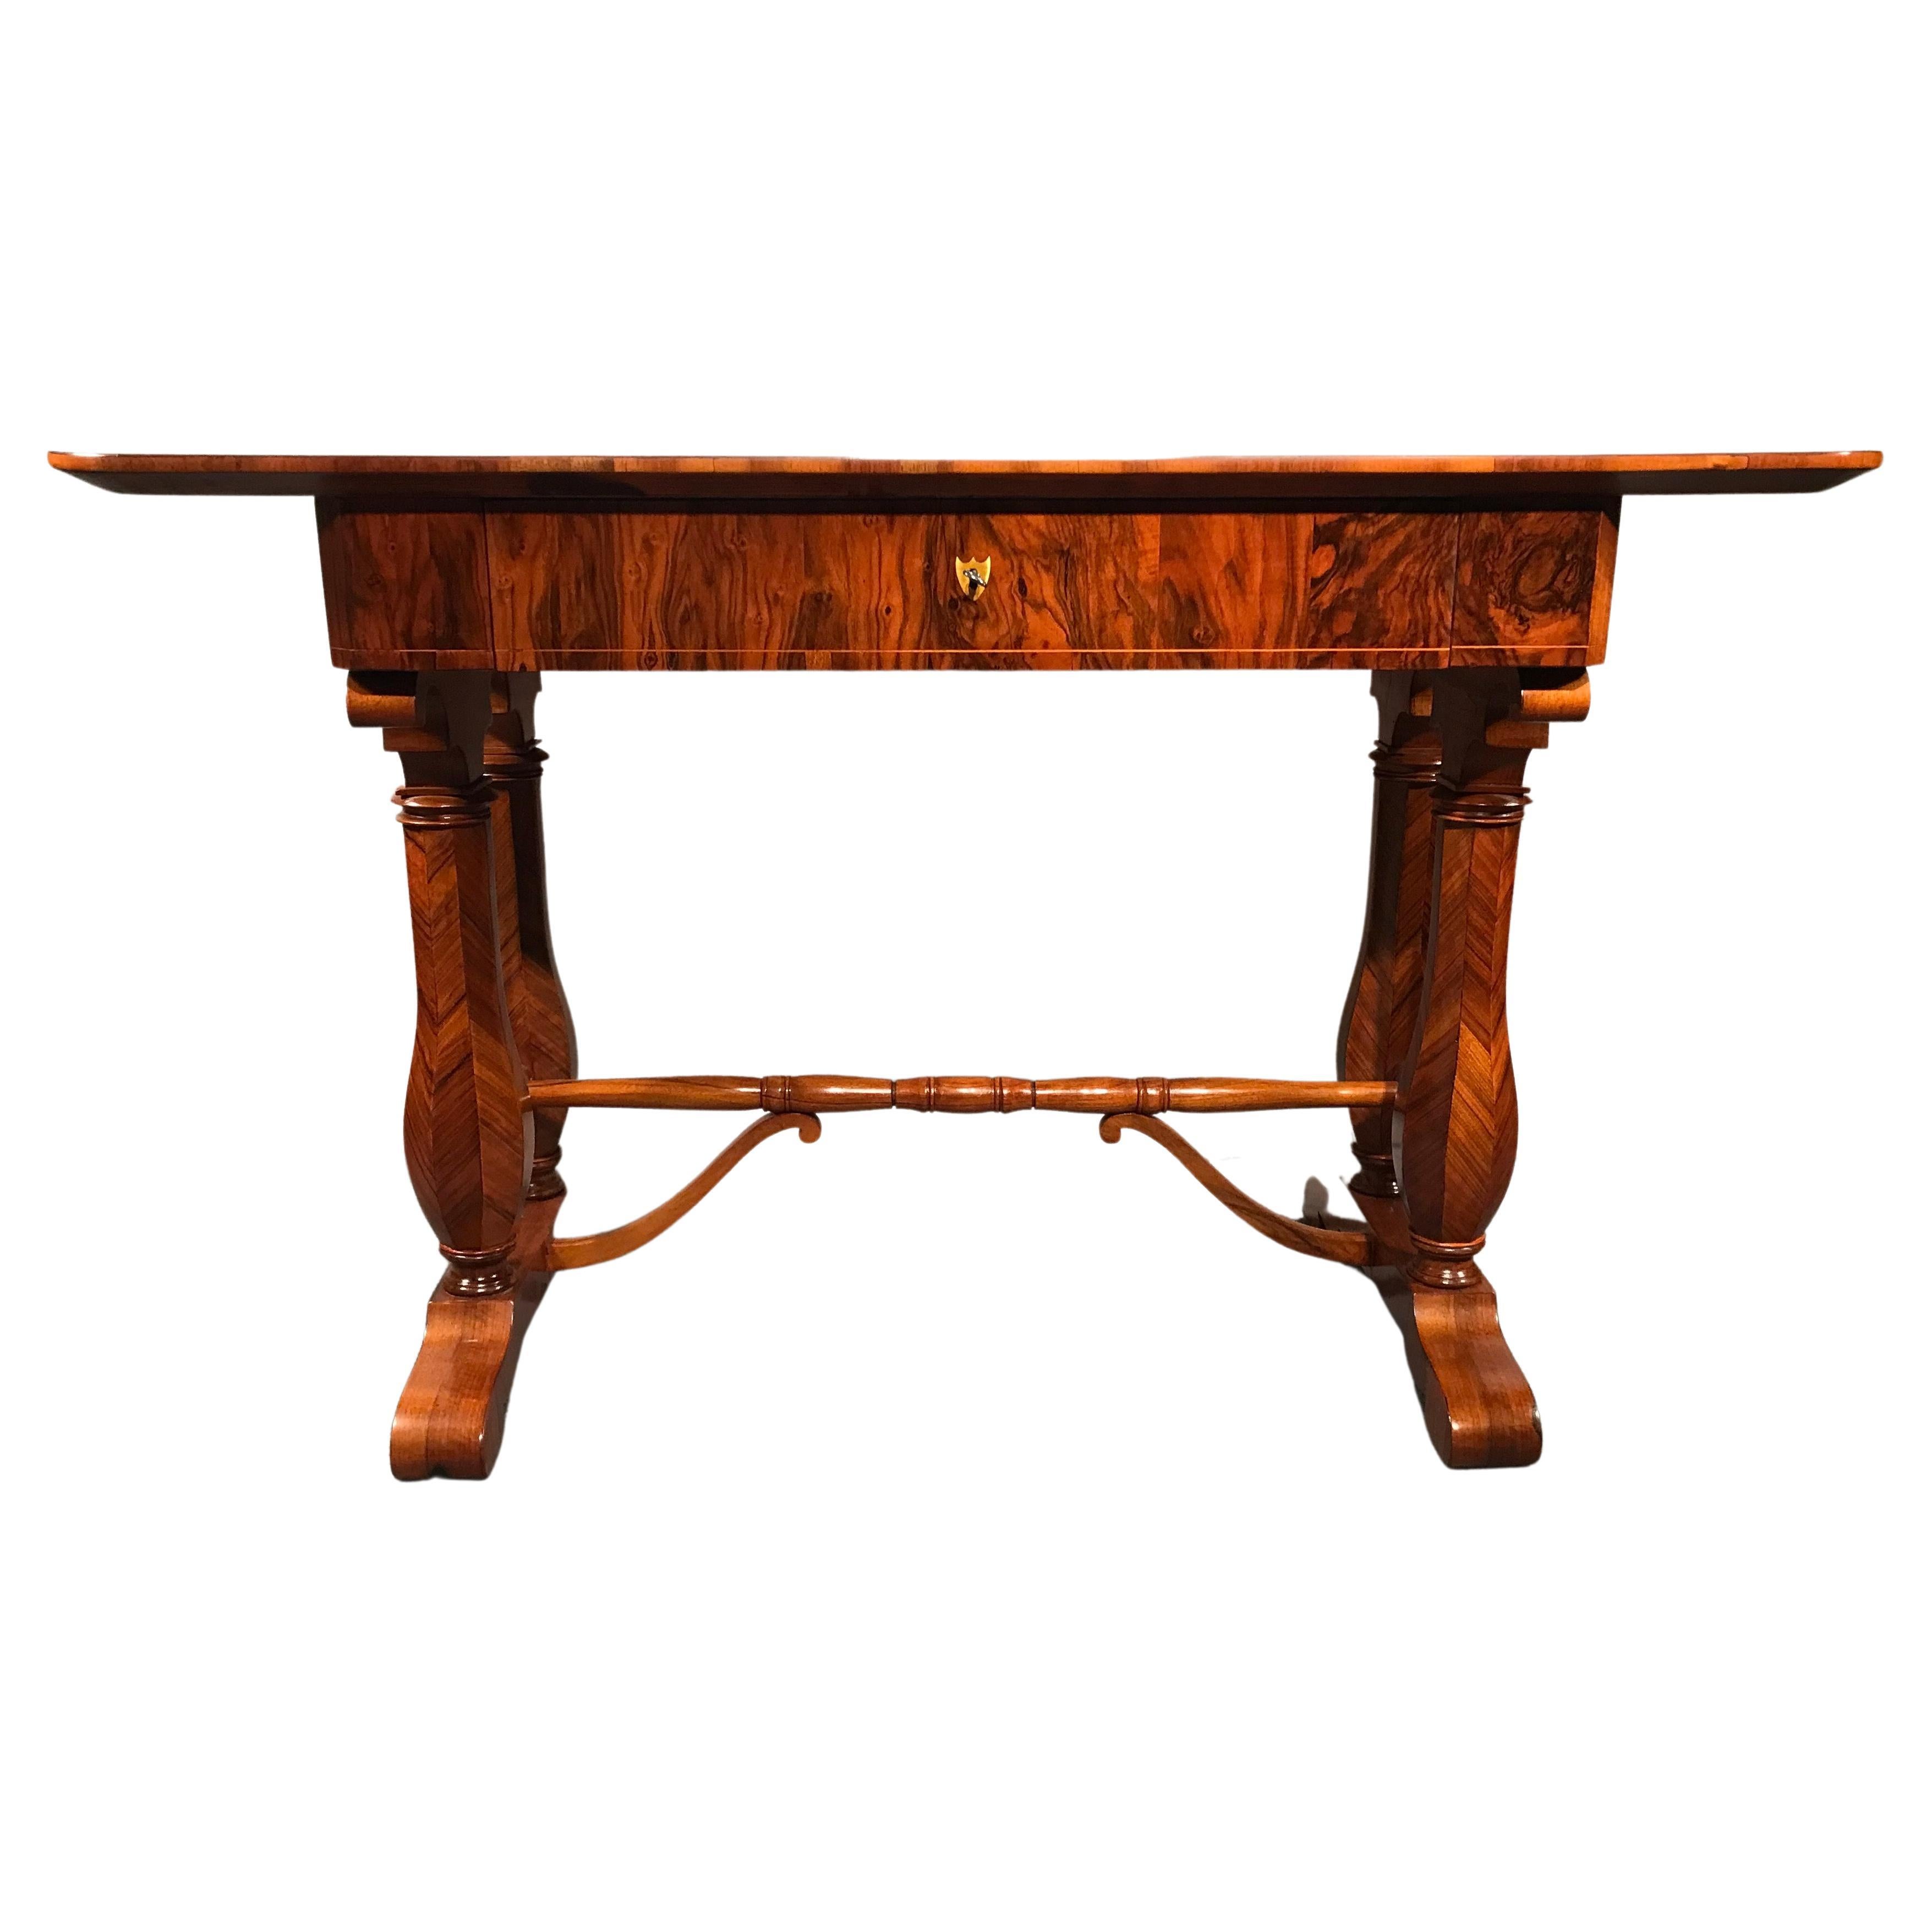 Beautiful writing desk, Vienna 1810-20, in the style of Josef Danhauser, walnut veneer. The hexagonal legs have a gorgeous herringbone veneer pattern. The top stands out for its root veneer grain.  
The desk comes refinished with a shellac hand